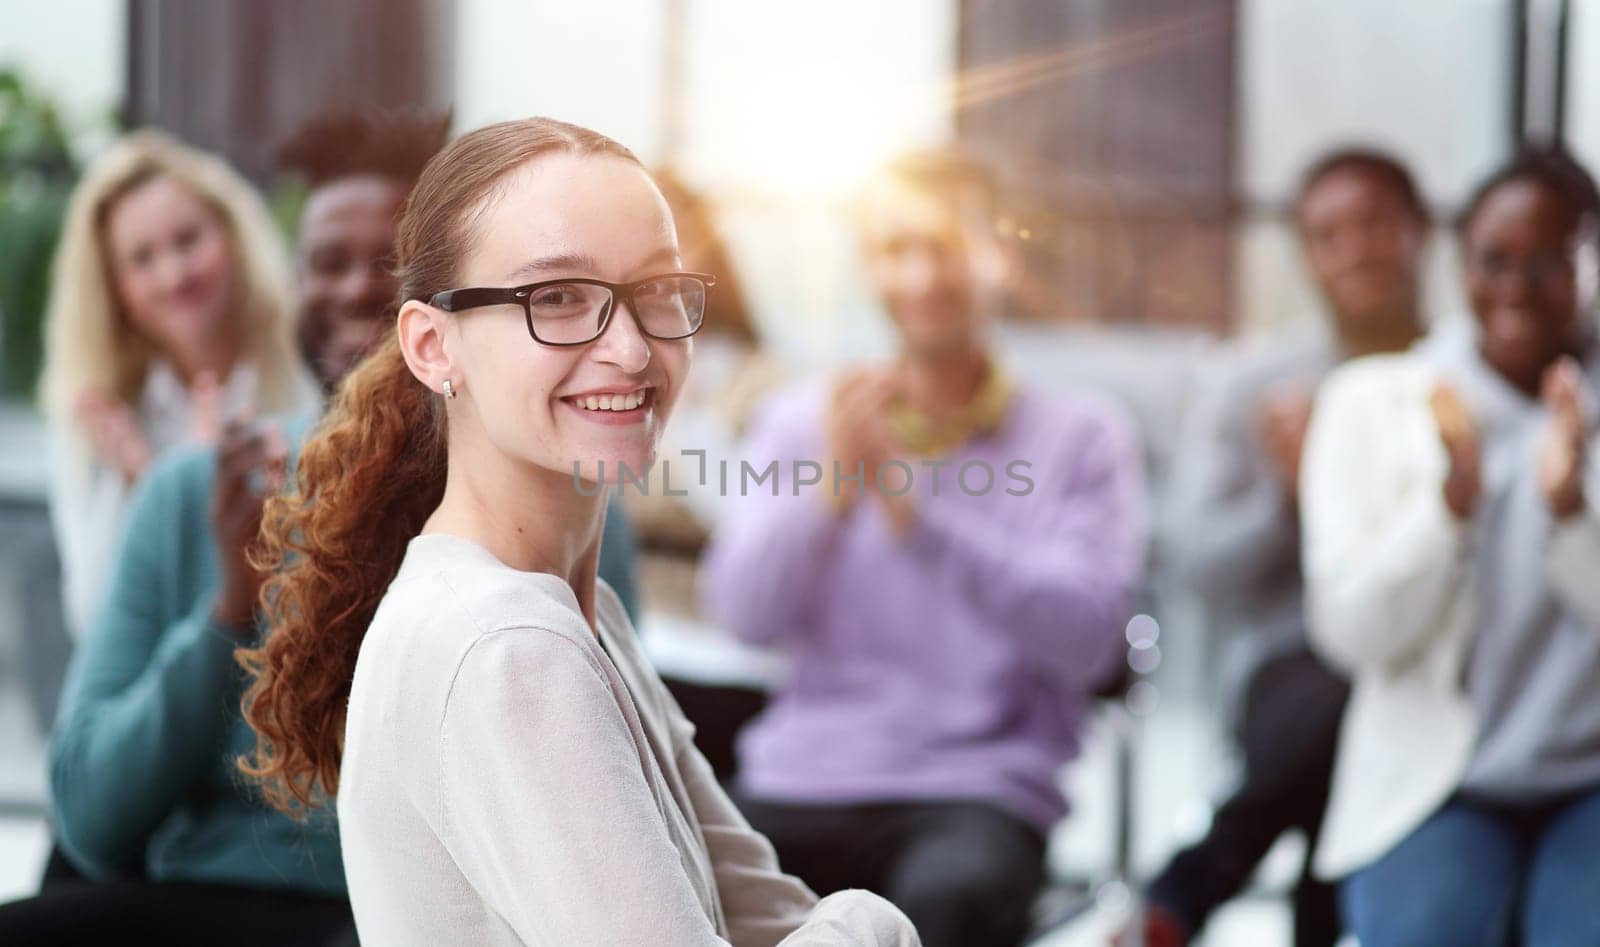 Smiling businesswoman in glasses looking at camera at a seminar with her colleagues nearby